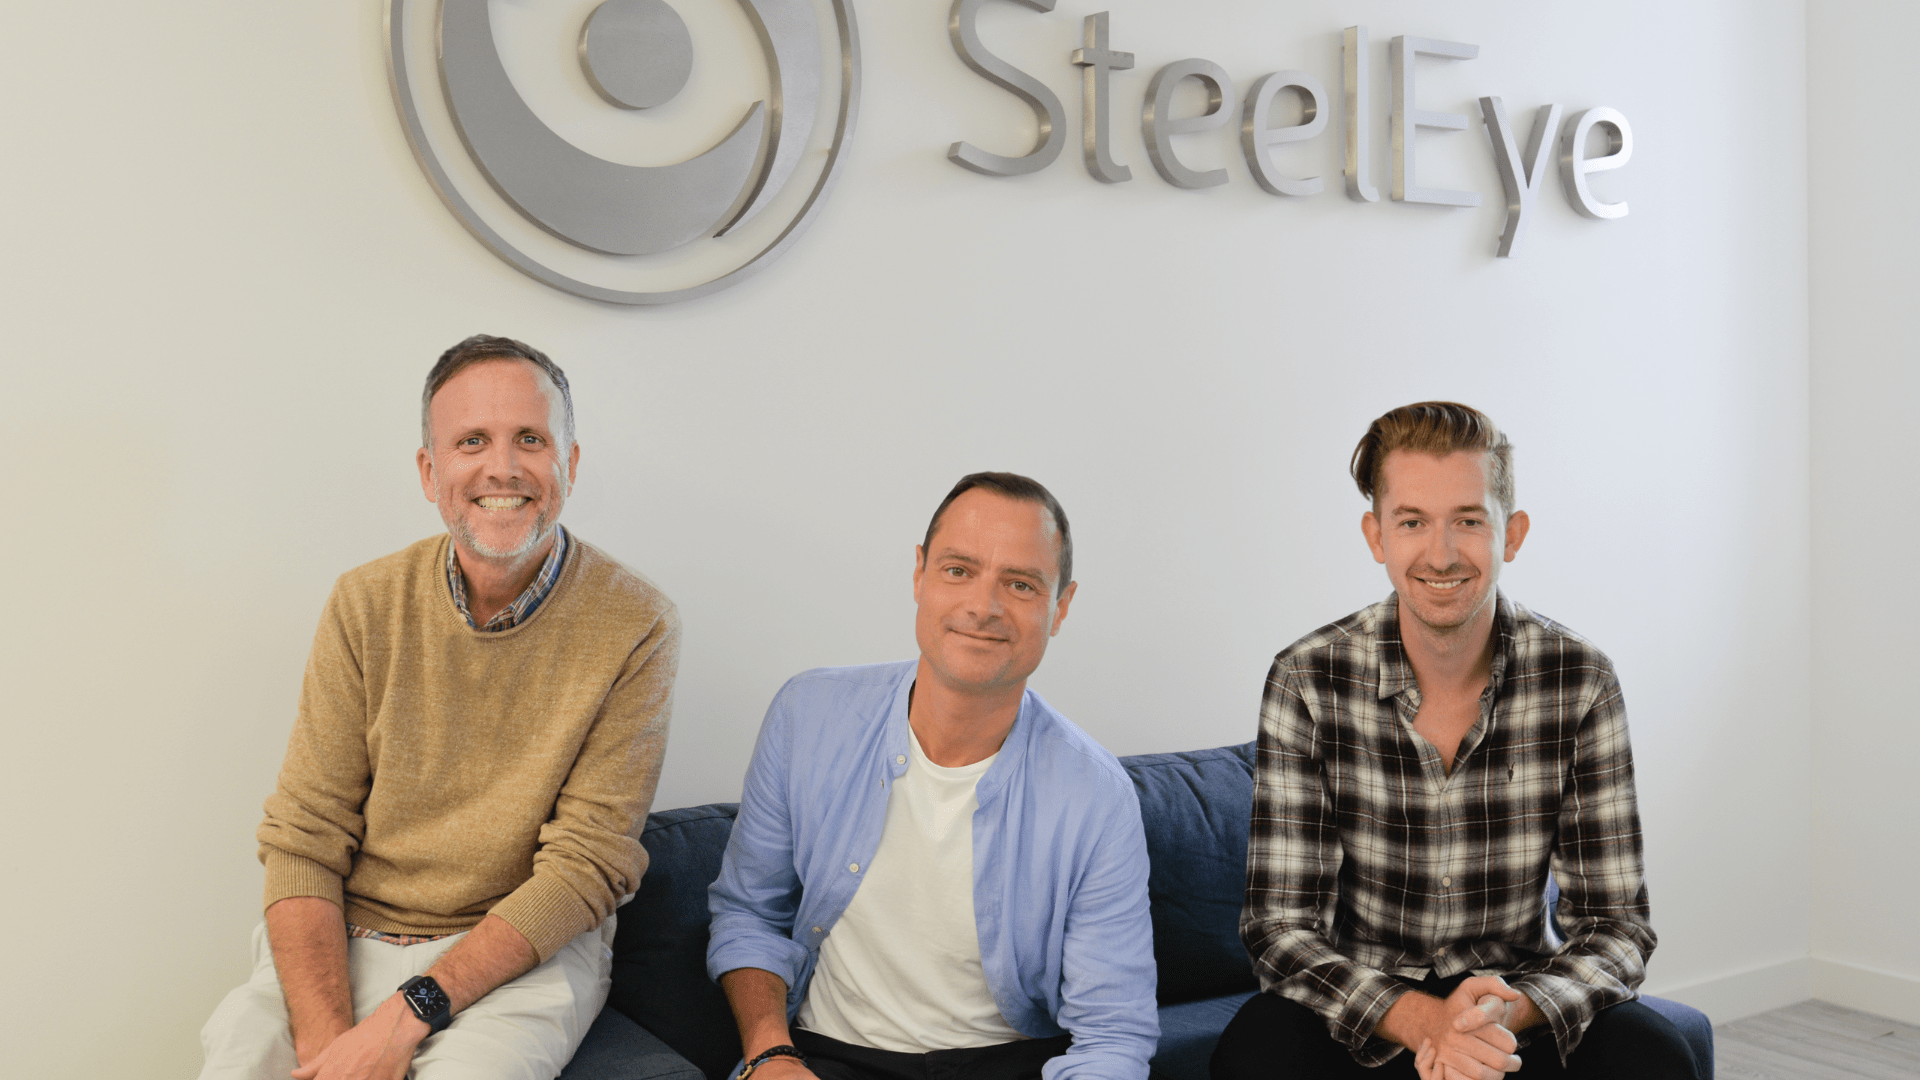 SteelEye founders - SteelEye raises $21M to accelerate growth – taking total funding to $43M